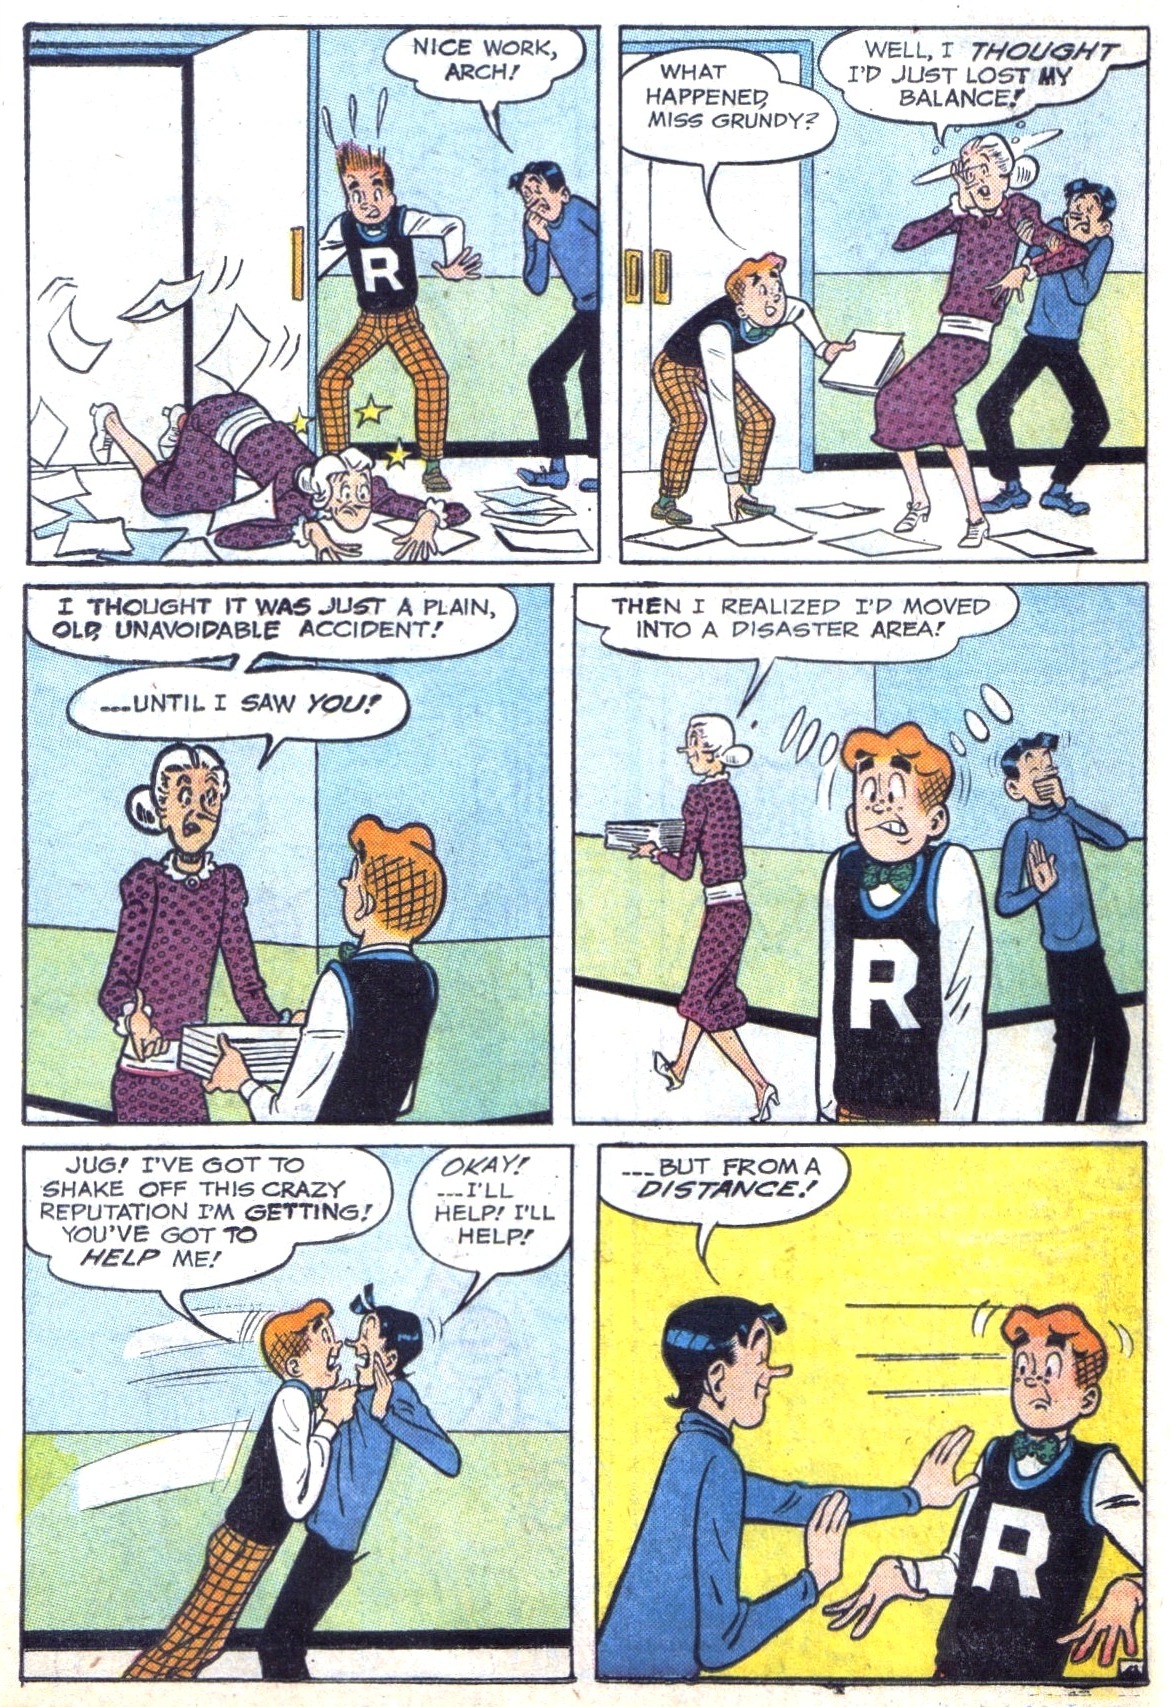 Archie (1960) 142 Page 6